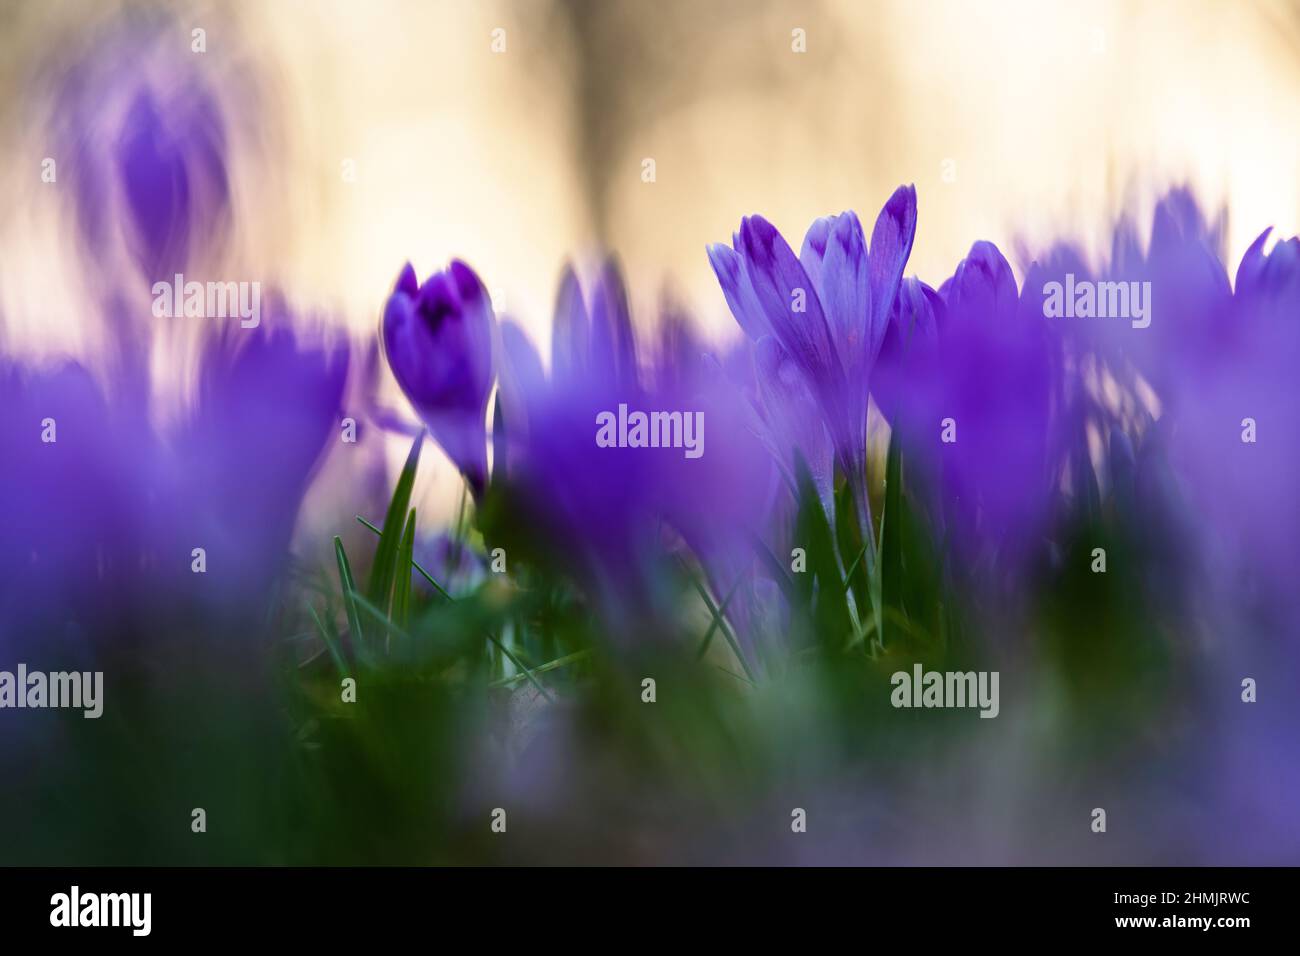 A lawn covered purple flowers of crocuses with the blurred background of green grass. Spring sunny day. Majestic nature wallpaper with forest flower. Stock Photo